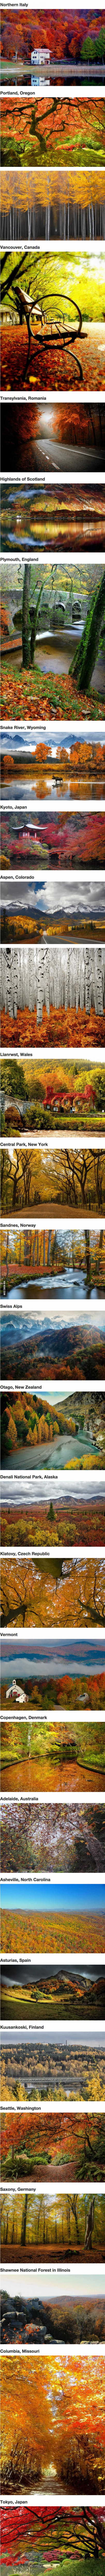 27 Places That Look Beautifully Unreal in Autumn